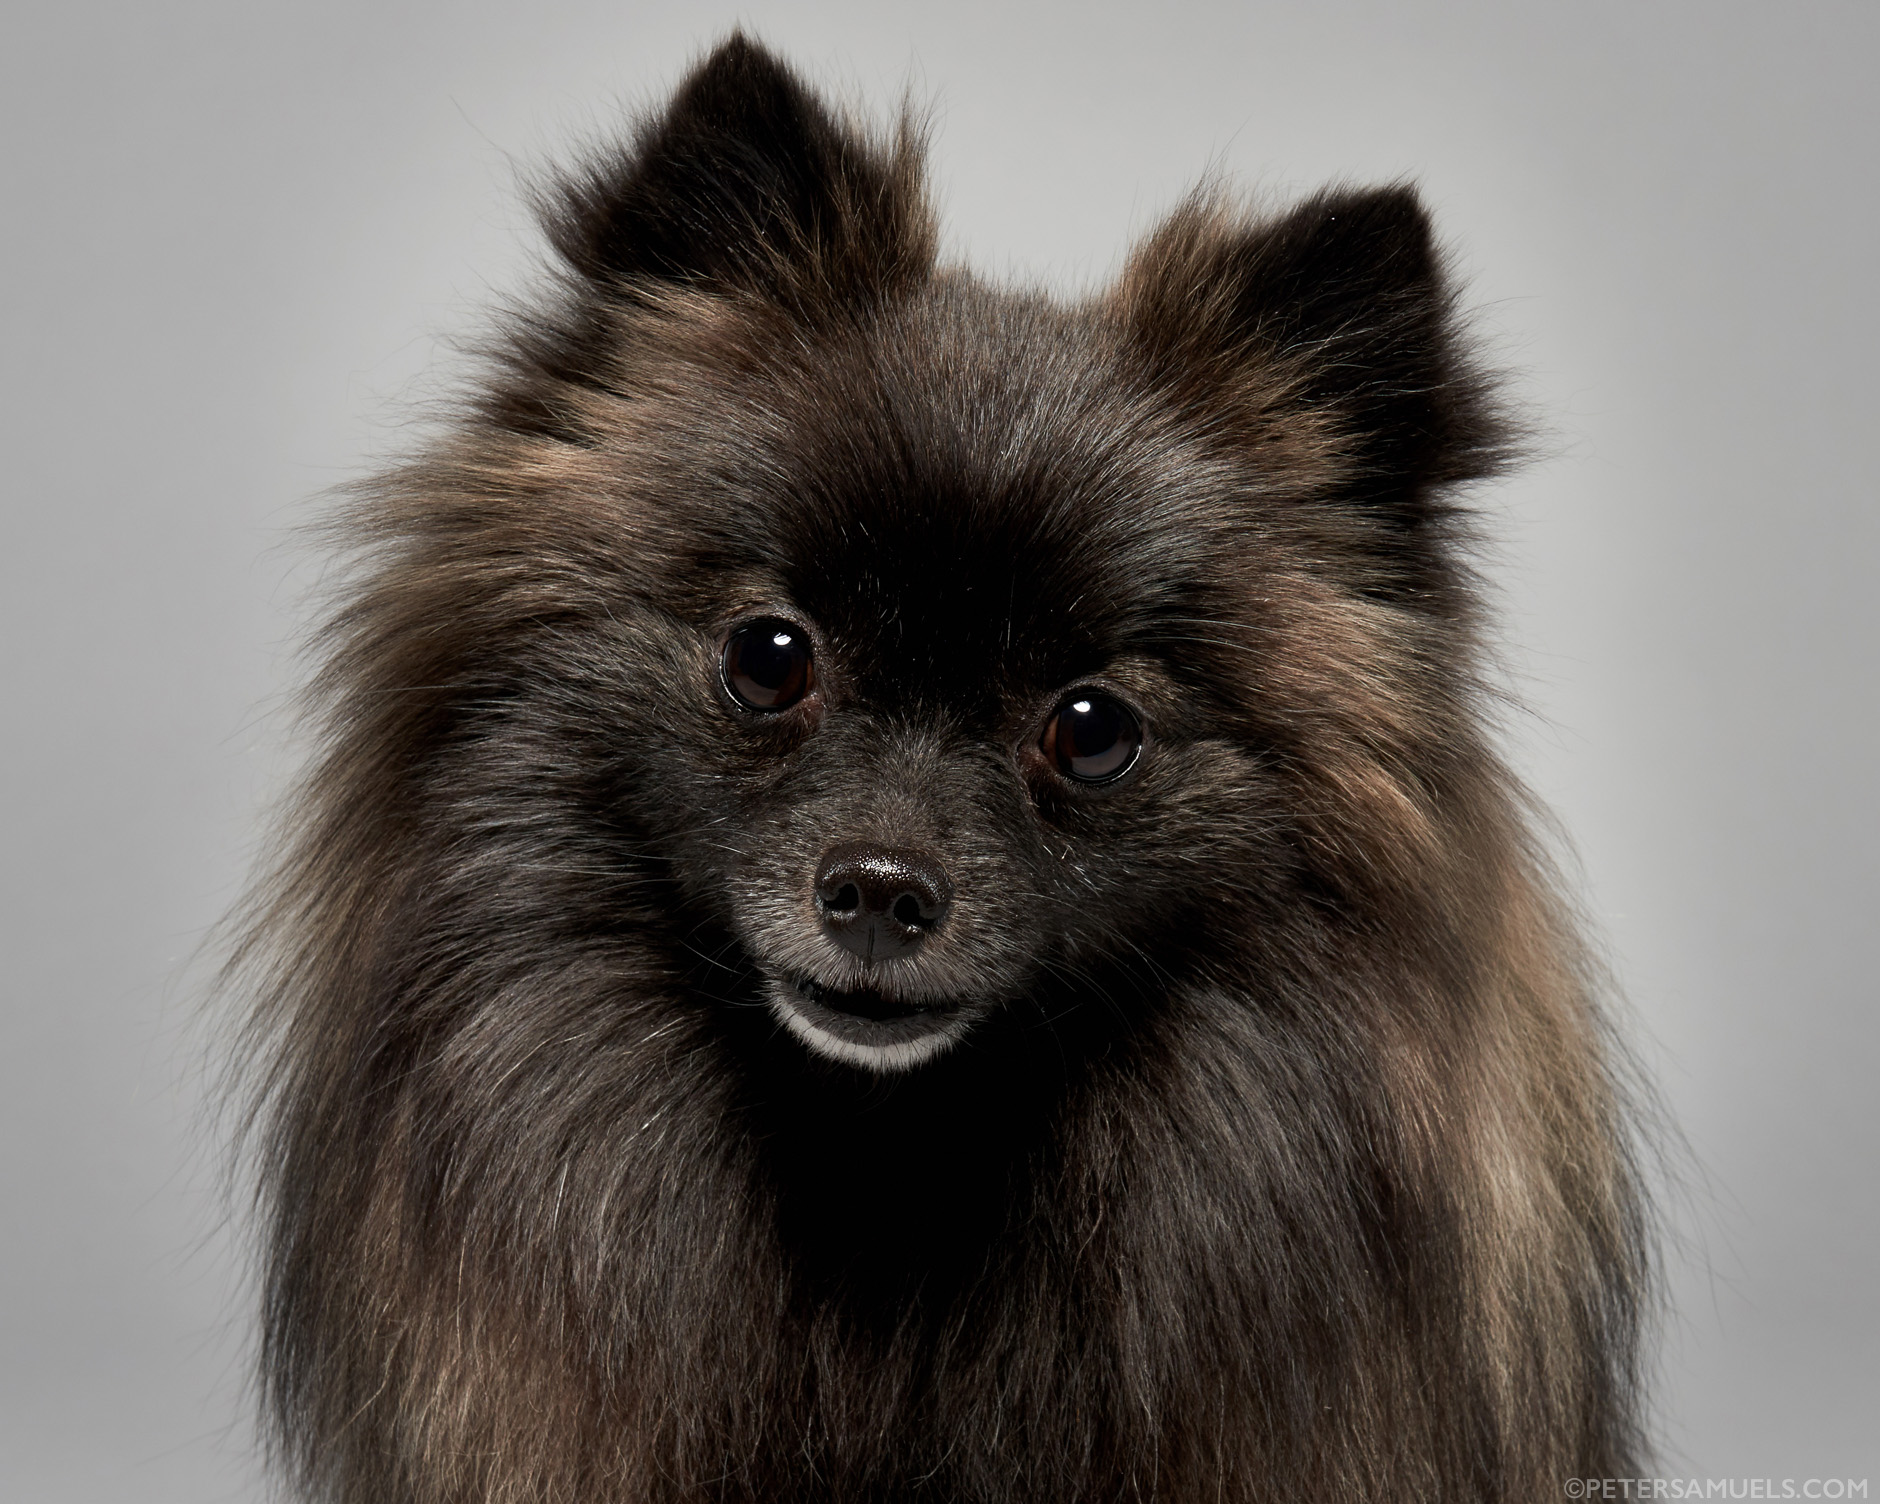 Fresh new dog portraits just in